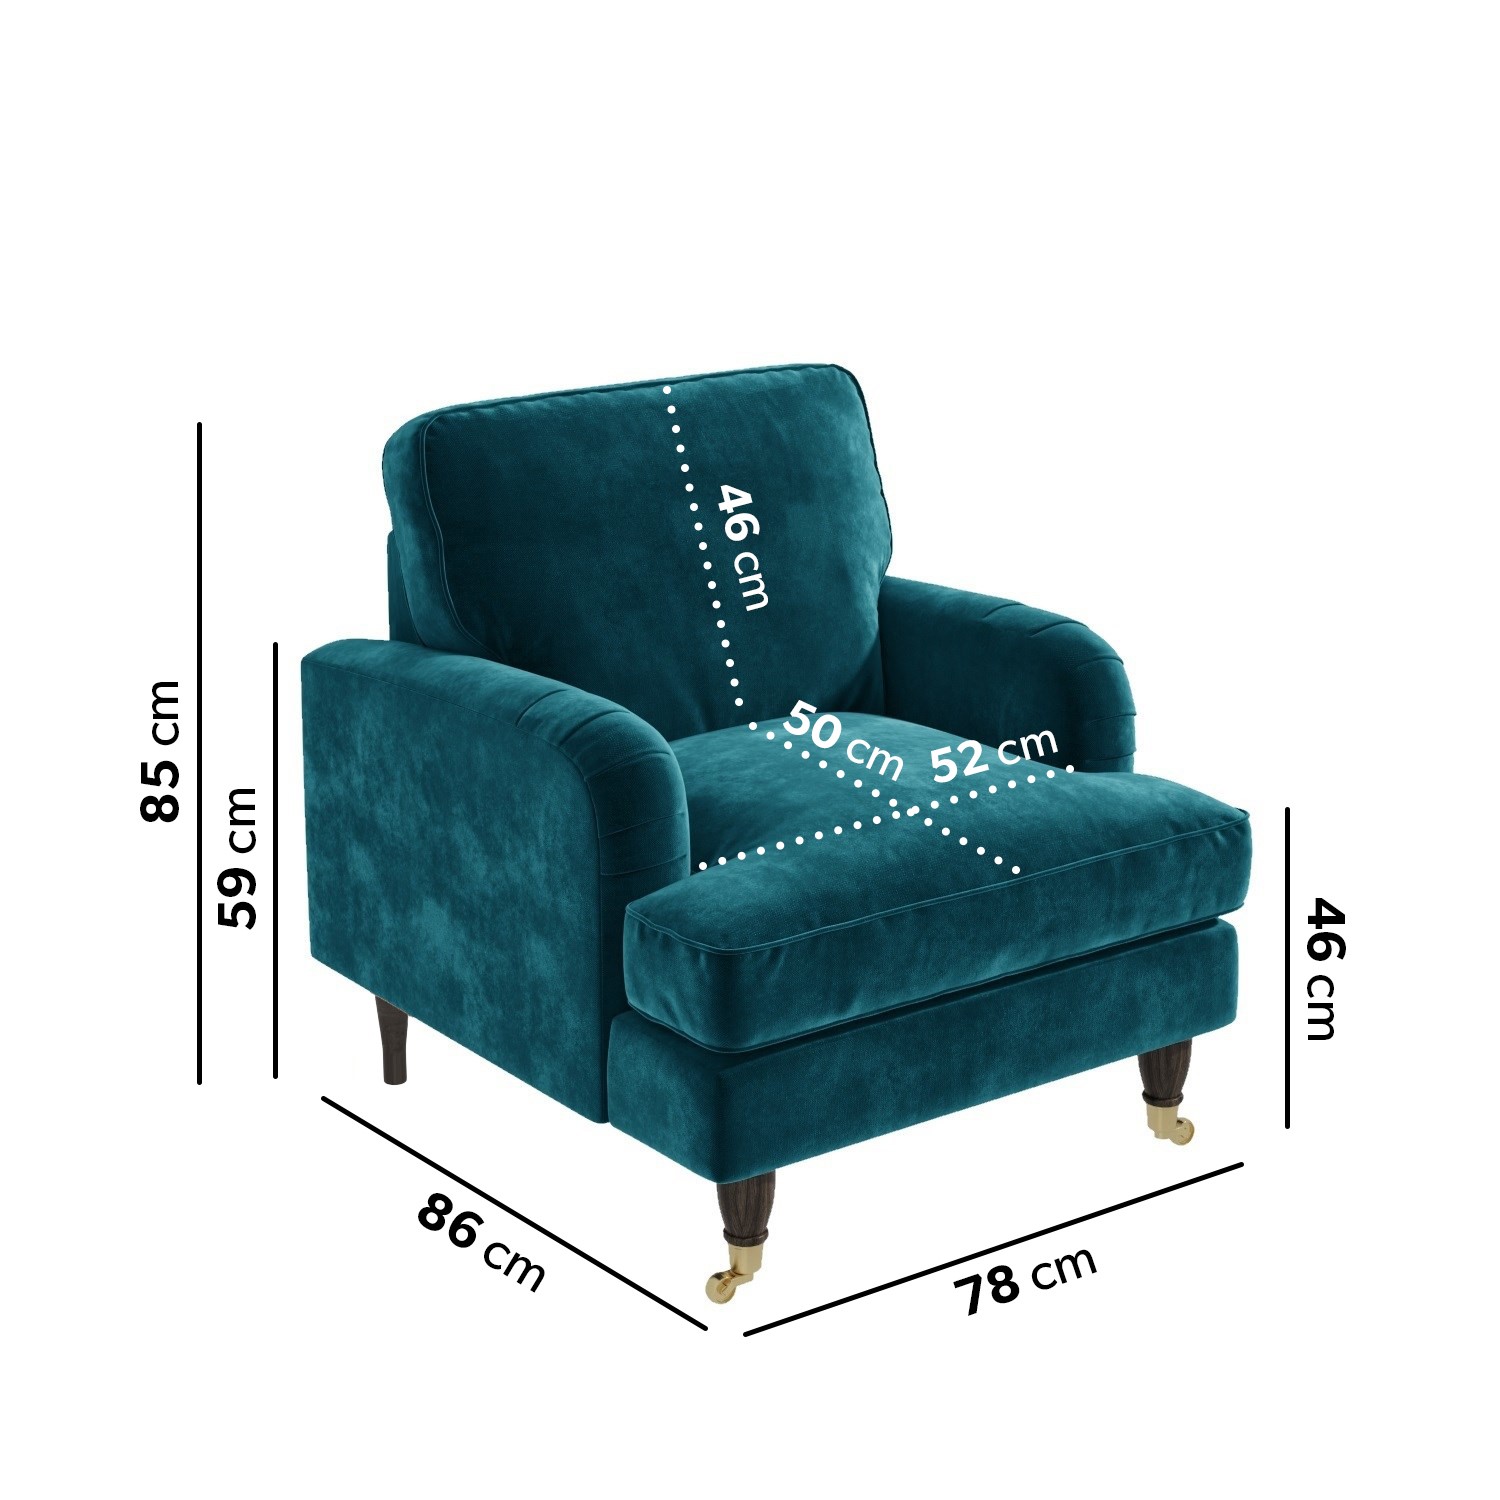 Read more about Teal velvet armchair payton